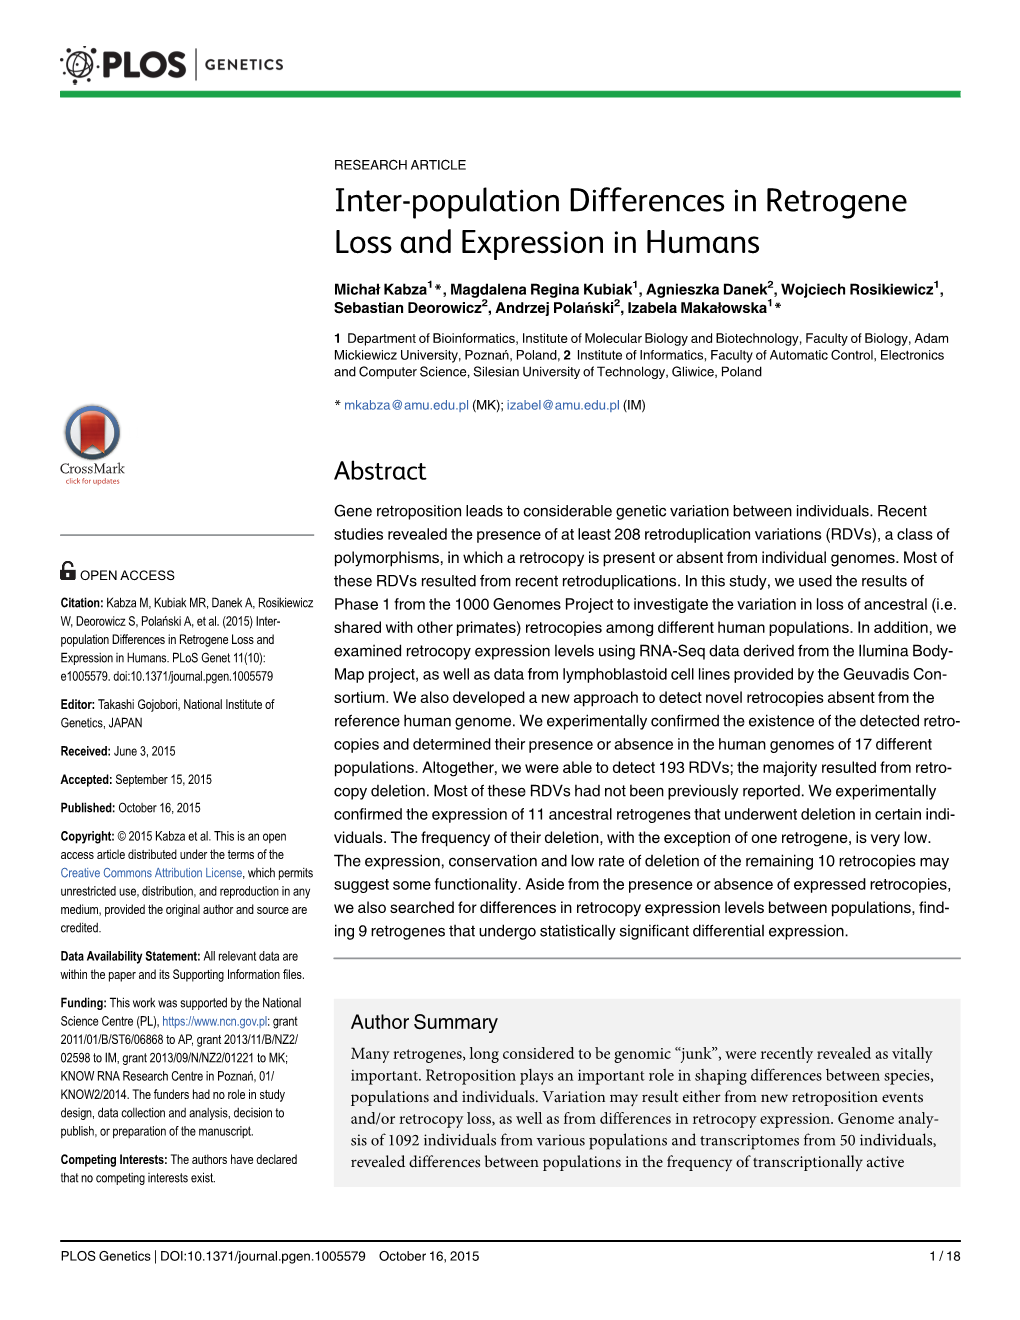 Inter-Population Differences in Retrogene Loss and Expression in Humans